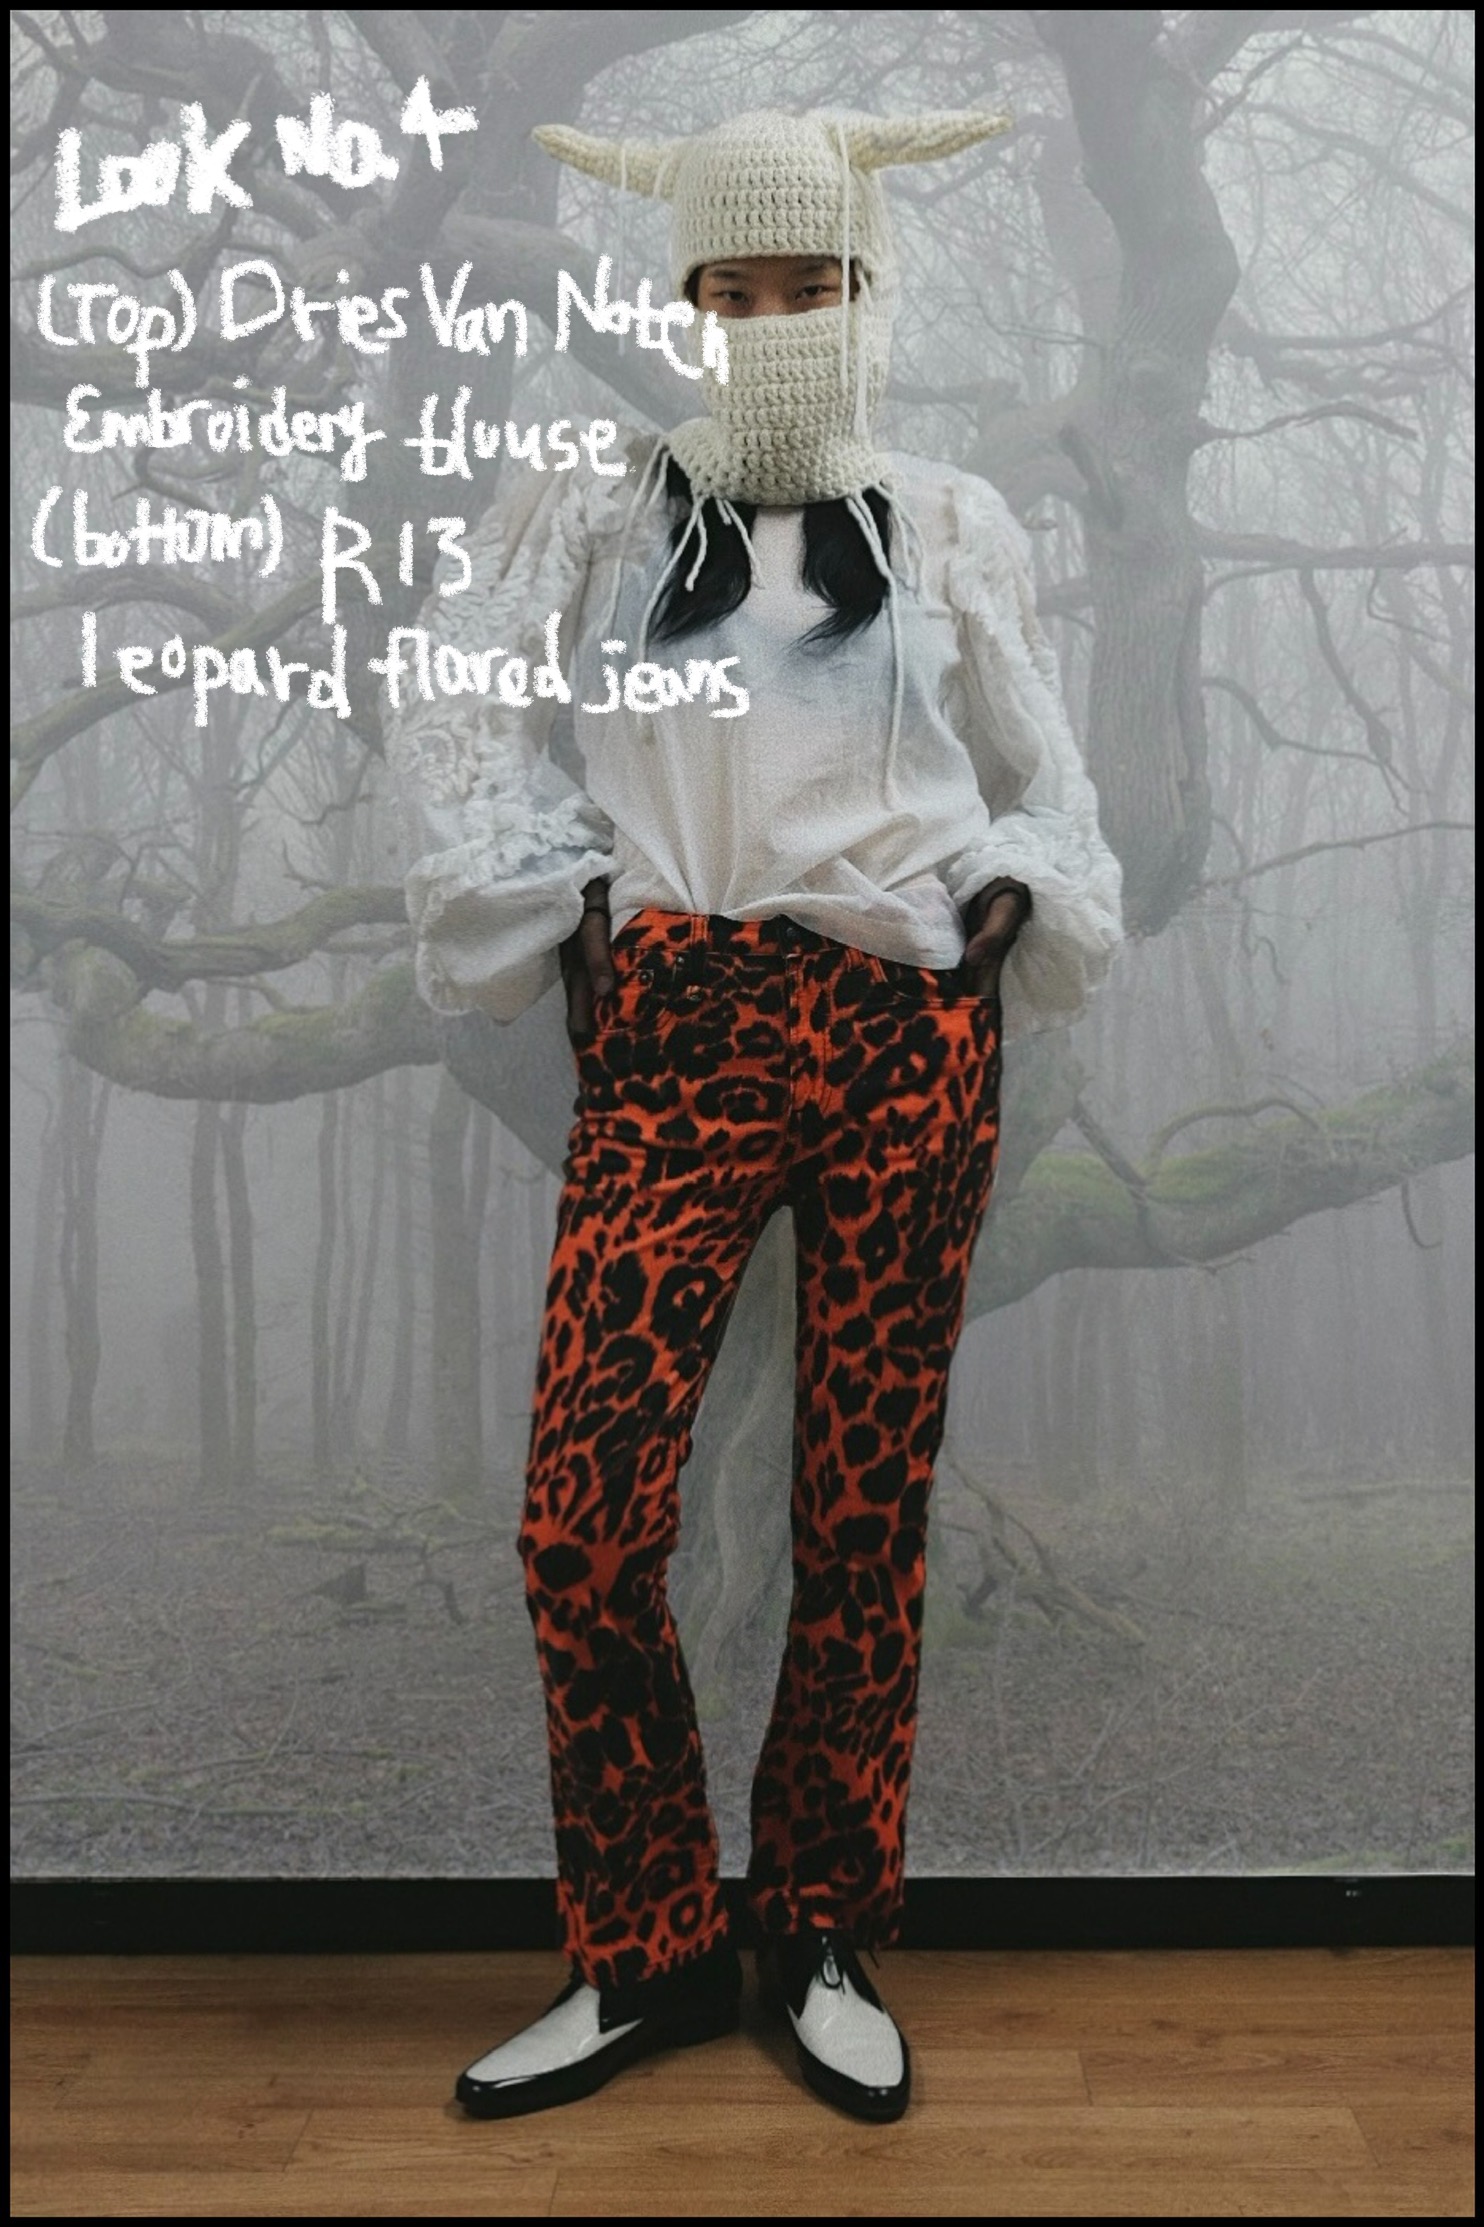 -30% Look no.4 (one and only) Dries Van Noten embroidery blouse &amp; R13 leopard flared jeans